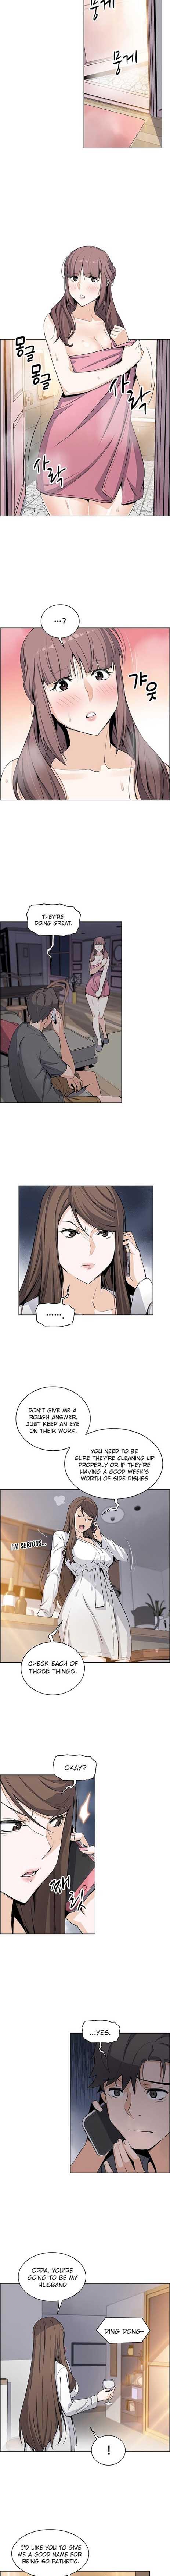 Housekeeper [Neck Pillow, Paper] Ch.49/49 [English] [Manhwa PDF] Completed 261